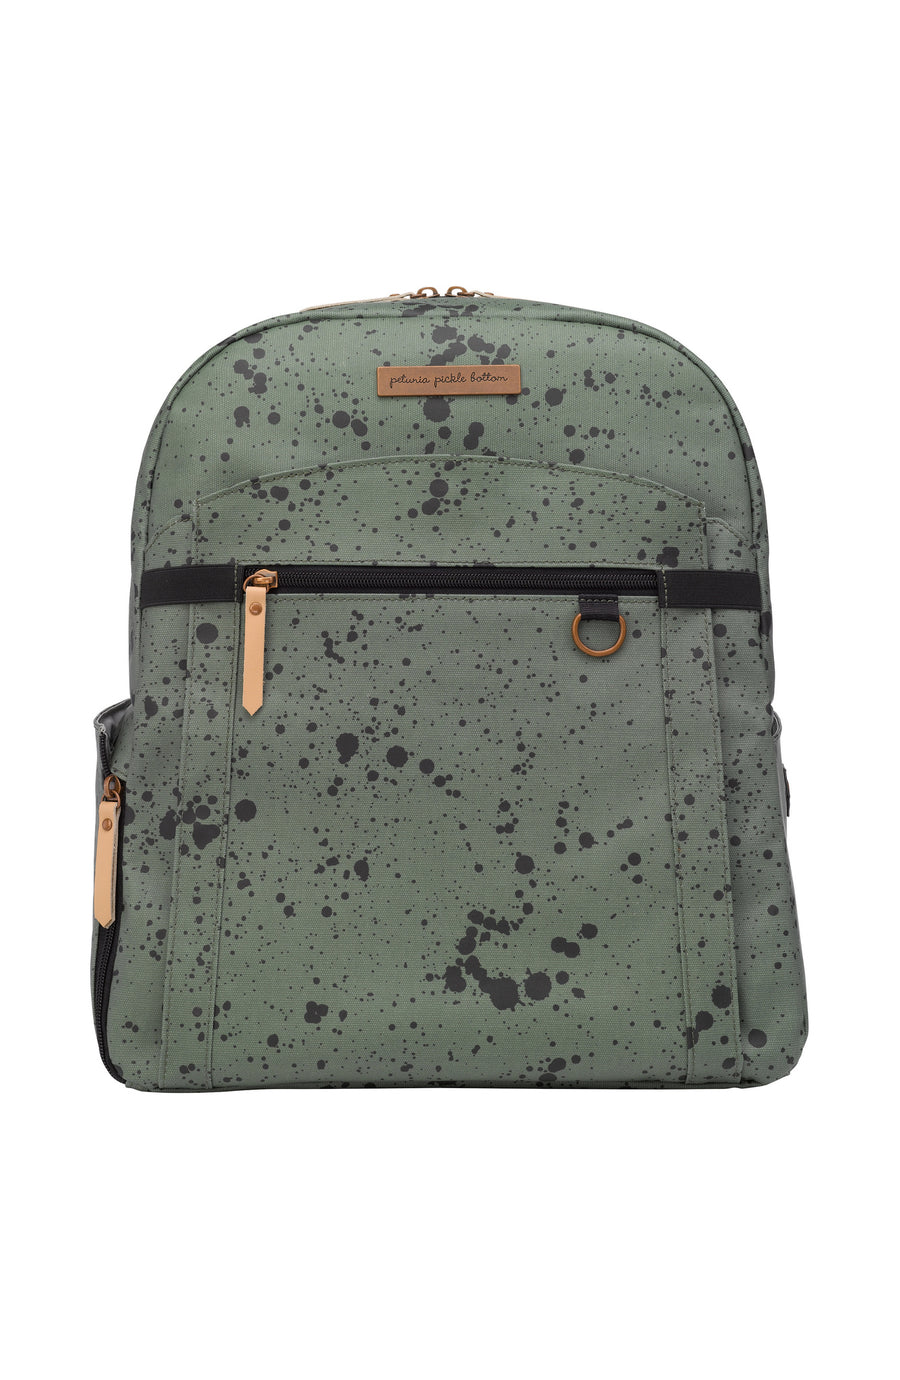 d - PPB - 2-in-1 Provisions Backpack - Olive Ink Blot 2-in-1 Provisions Backpack - Olive Ink Blot 810081350068